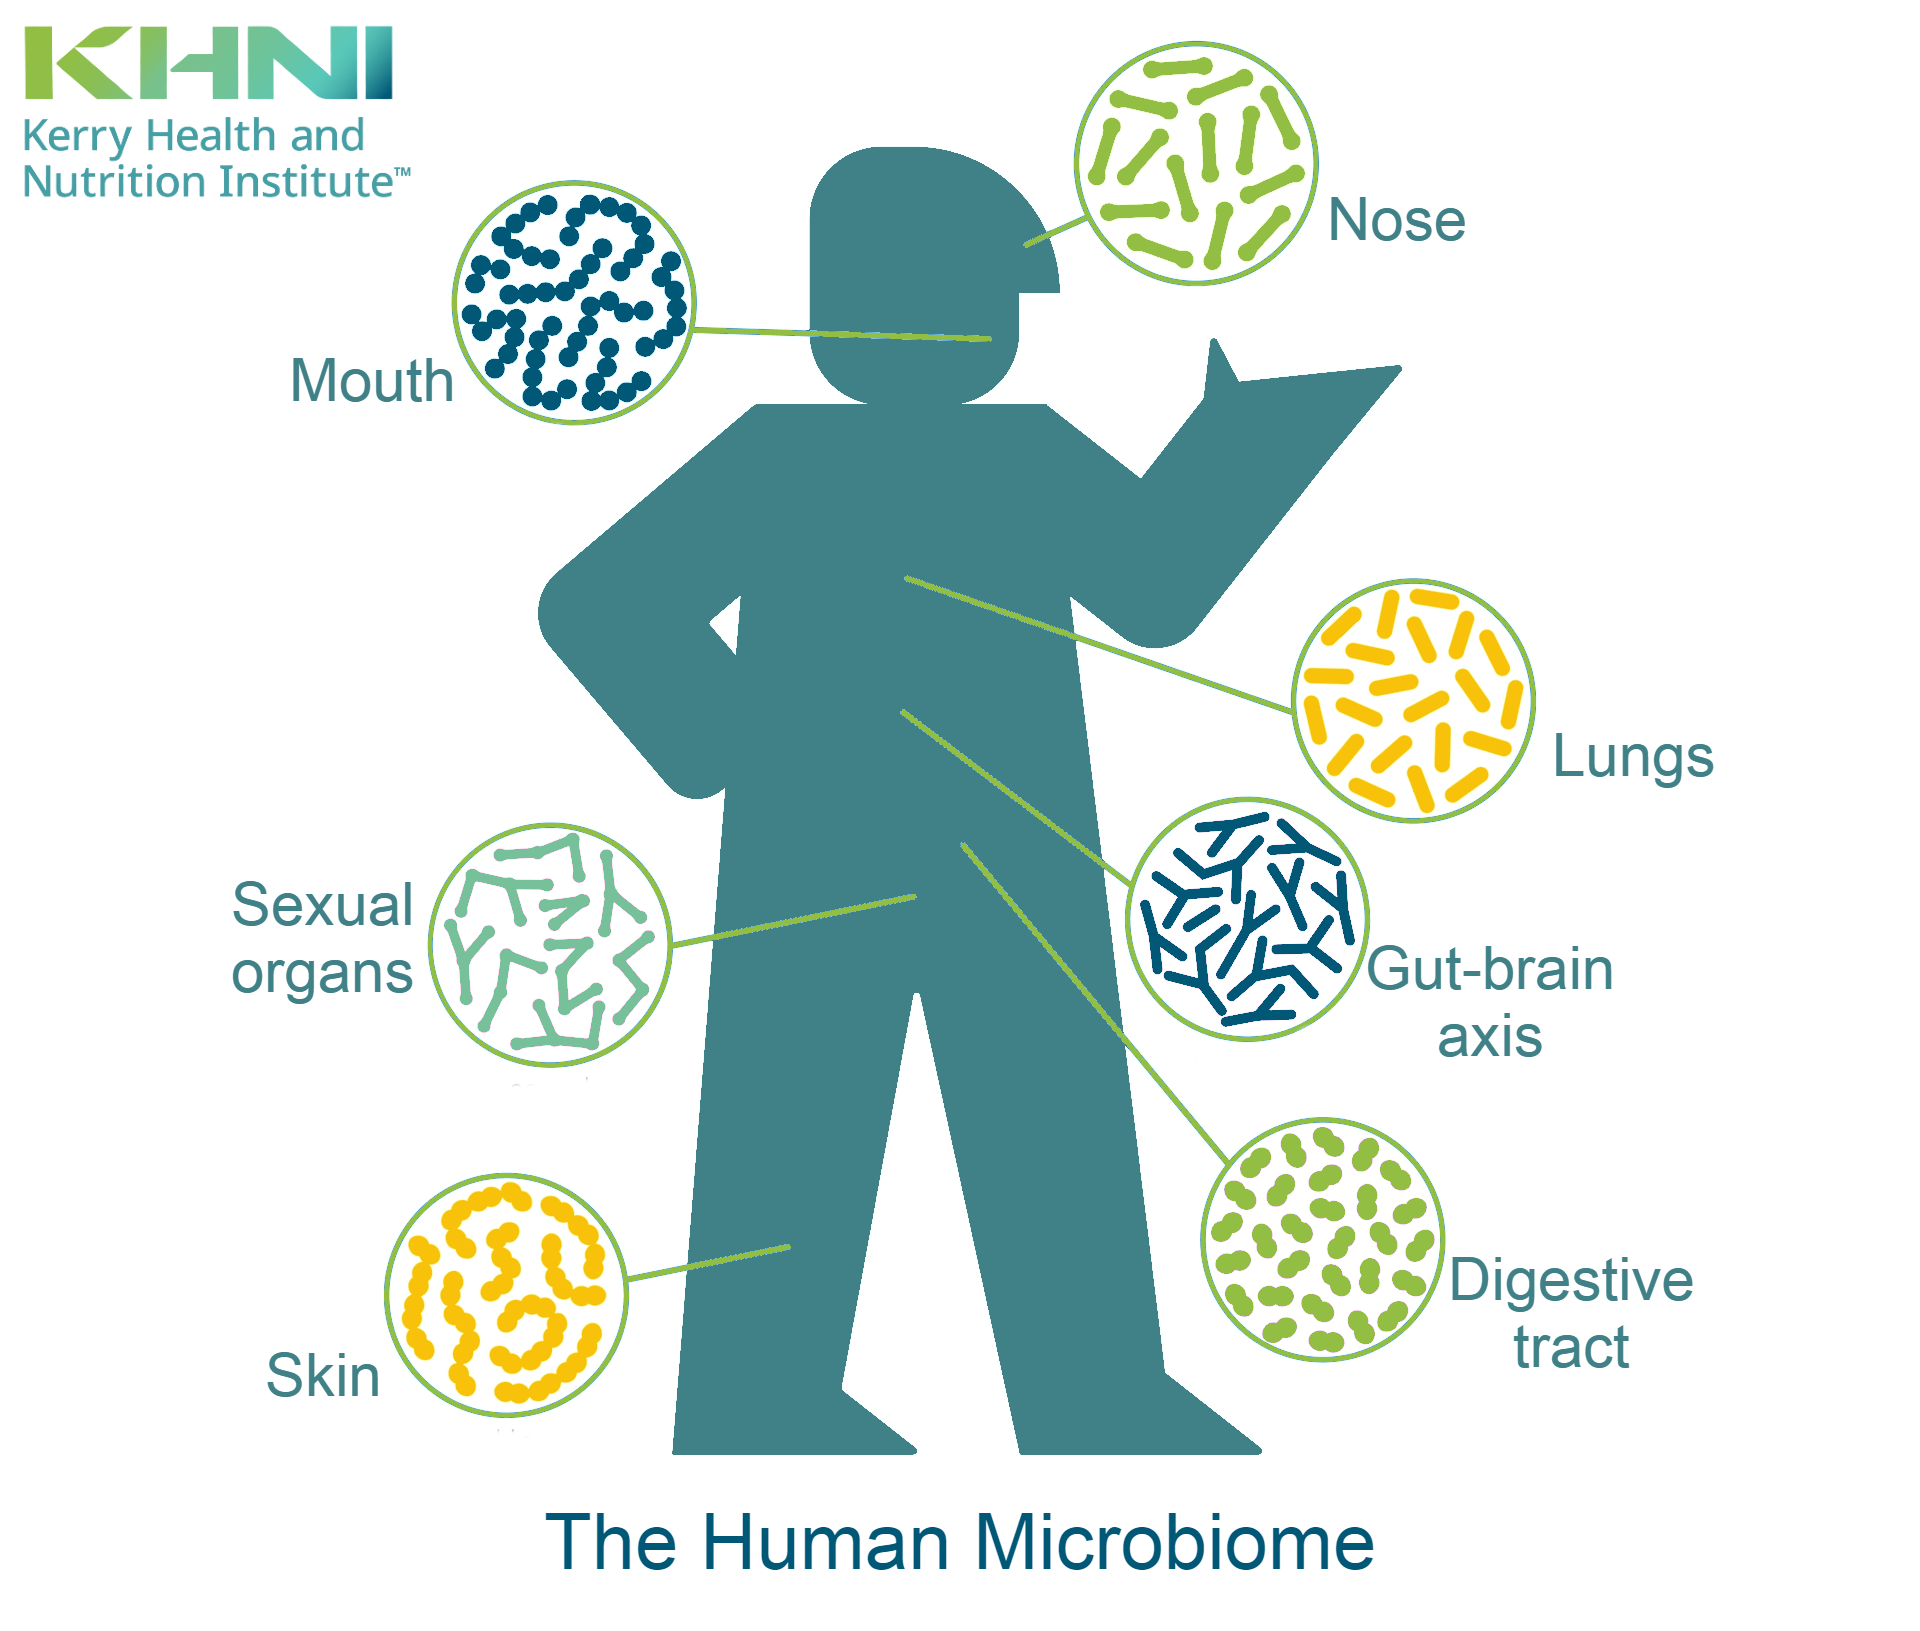 Infographic showing the composition of the human microbiome - skin, mouth, lungs, gut, gut-brain axis